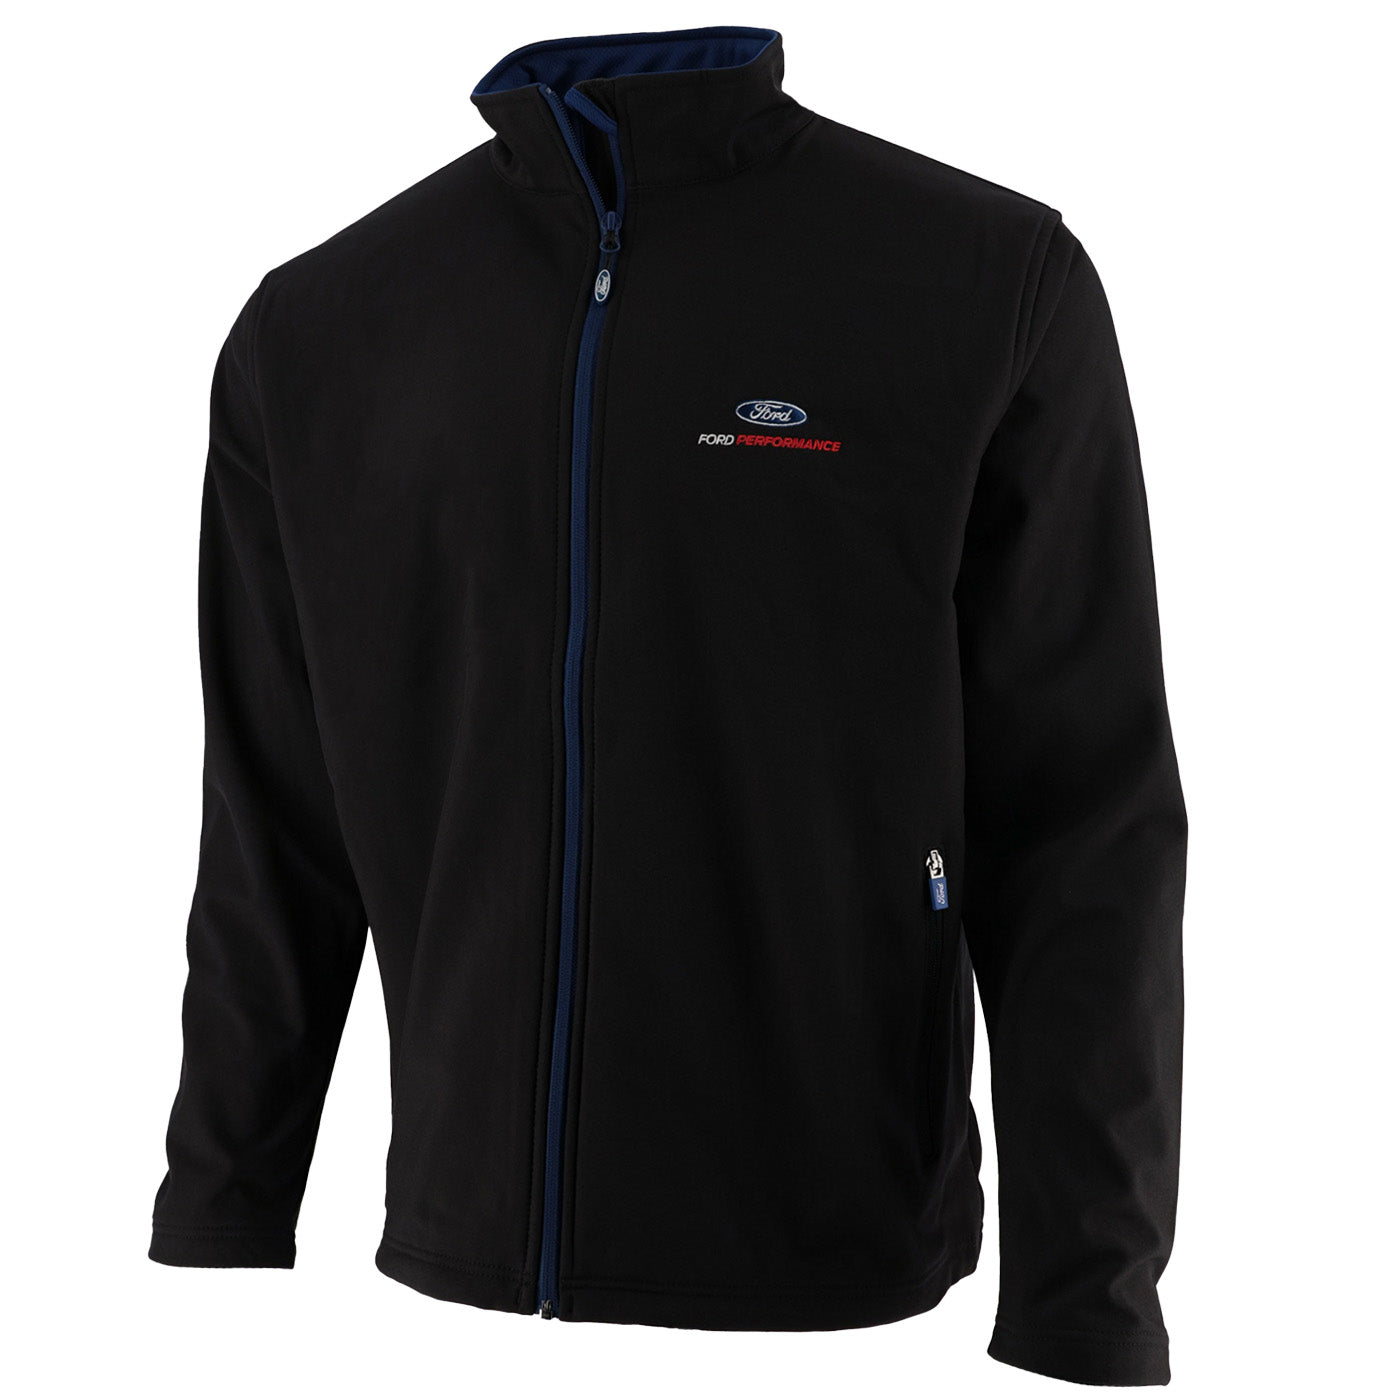 Ford Performance Men's Corporate Softshell Jacket